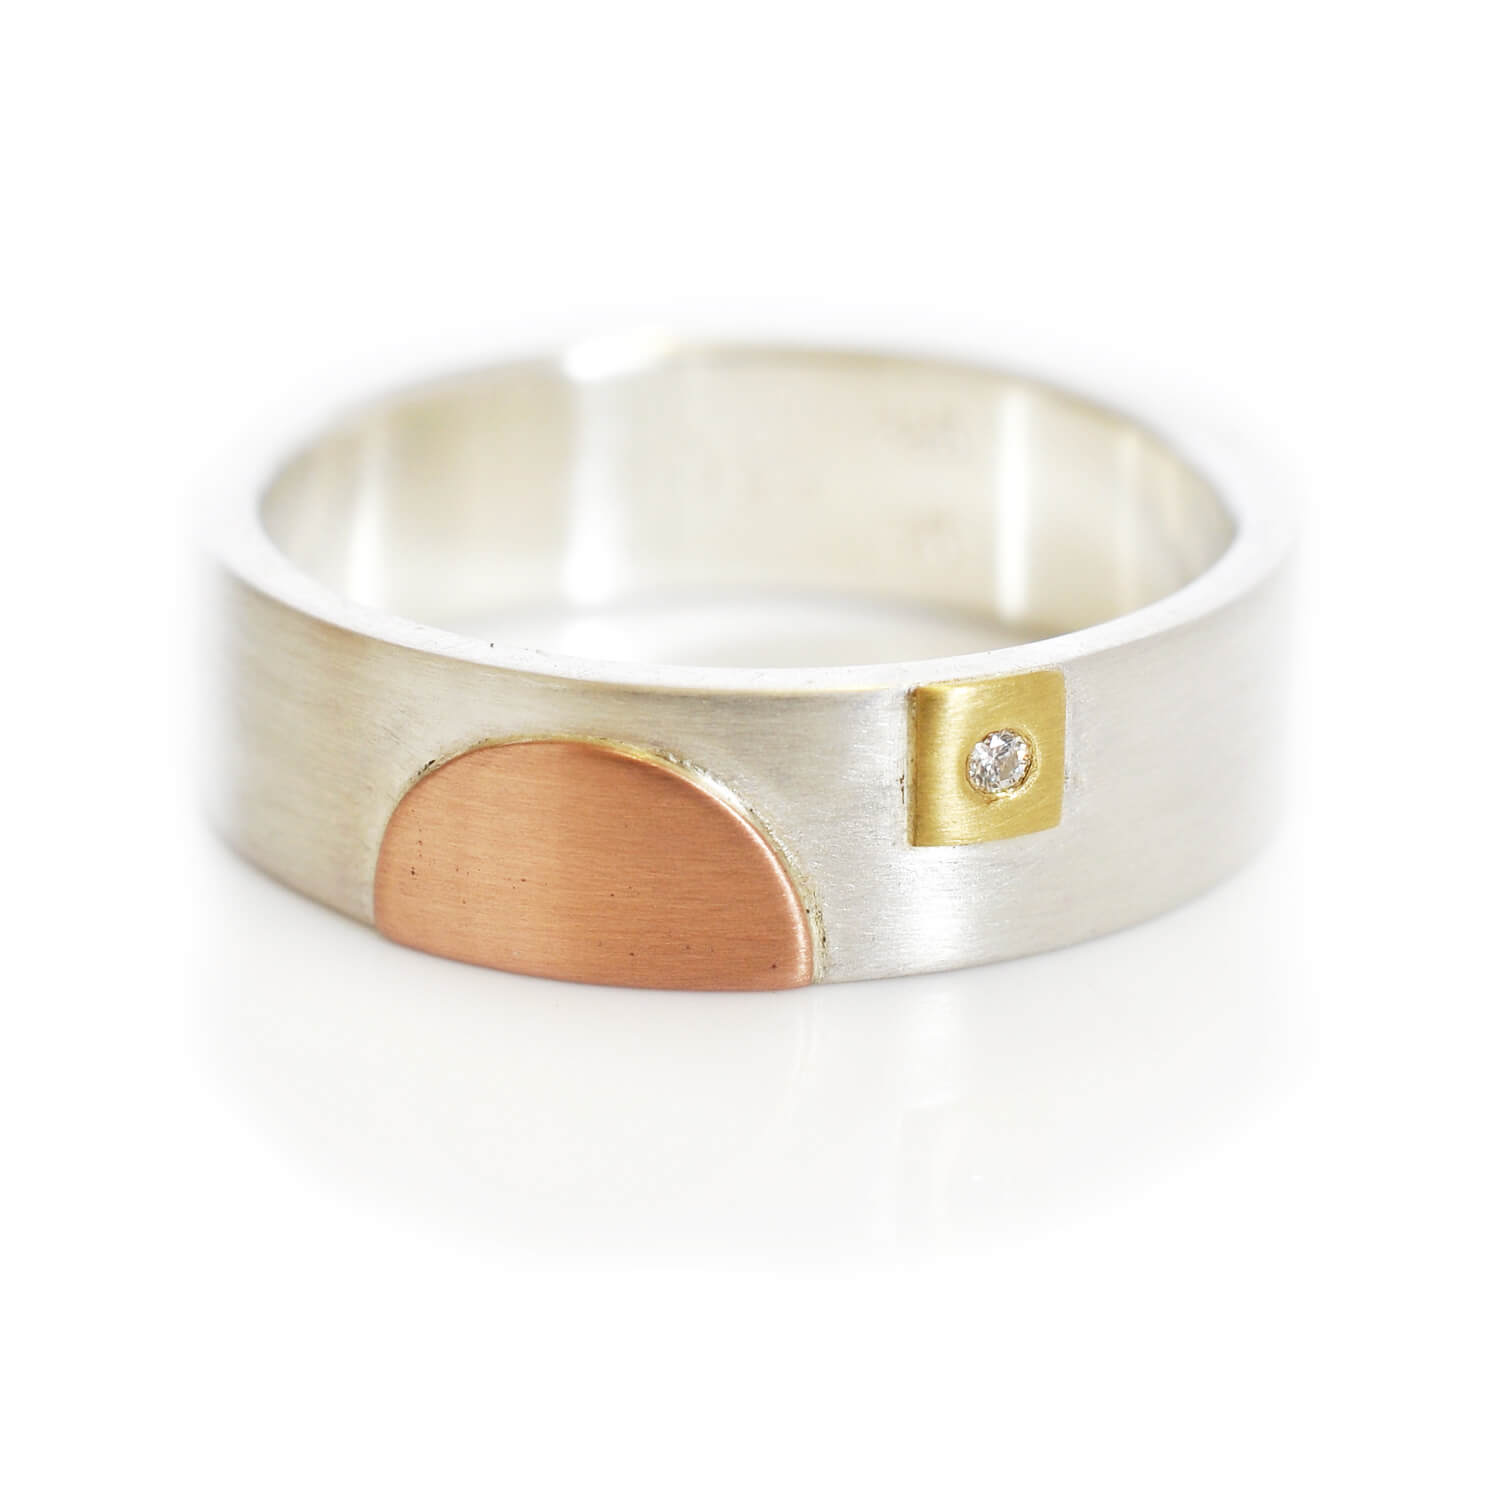 Sterling silver ring with rose gold, yellow gold, and diamond accent. Handmade by EC Design Jewelry in Minneapolis, MN using recycled metal and conflict-free stone.